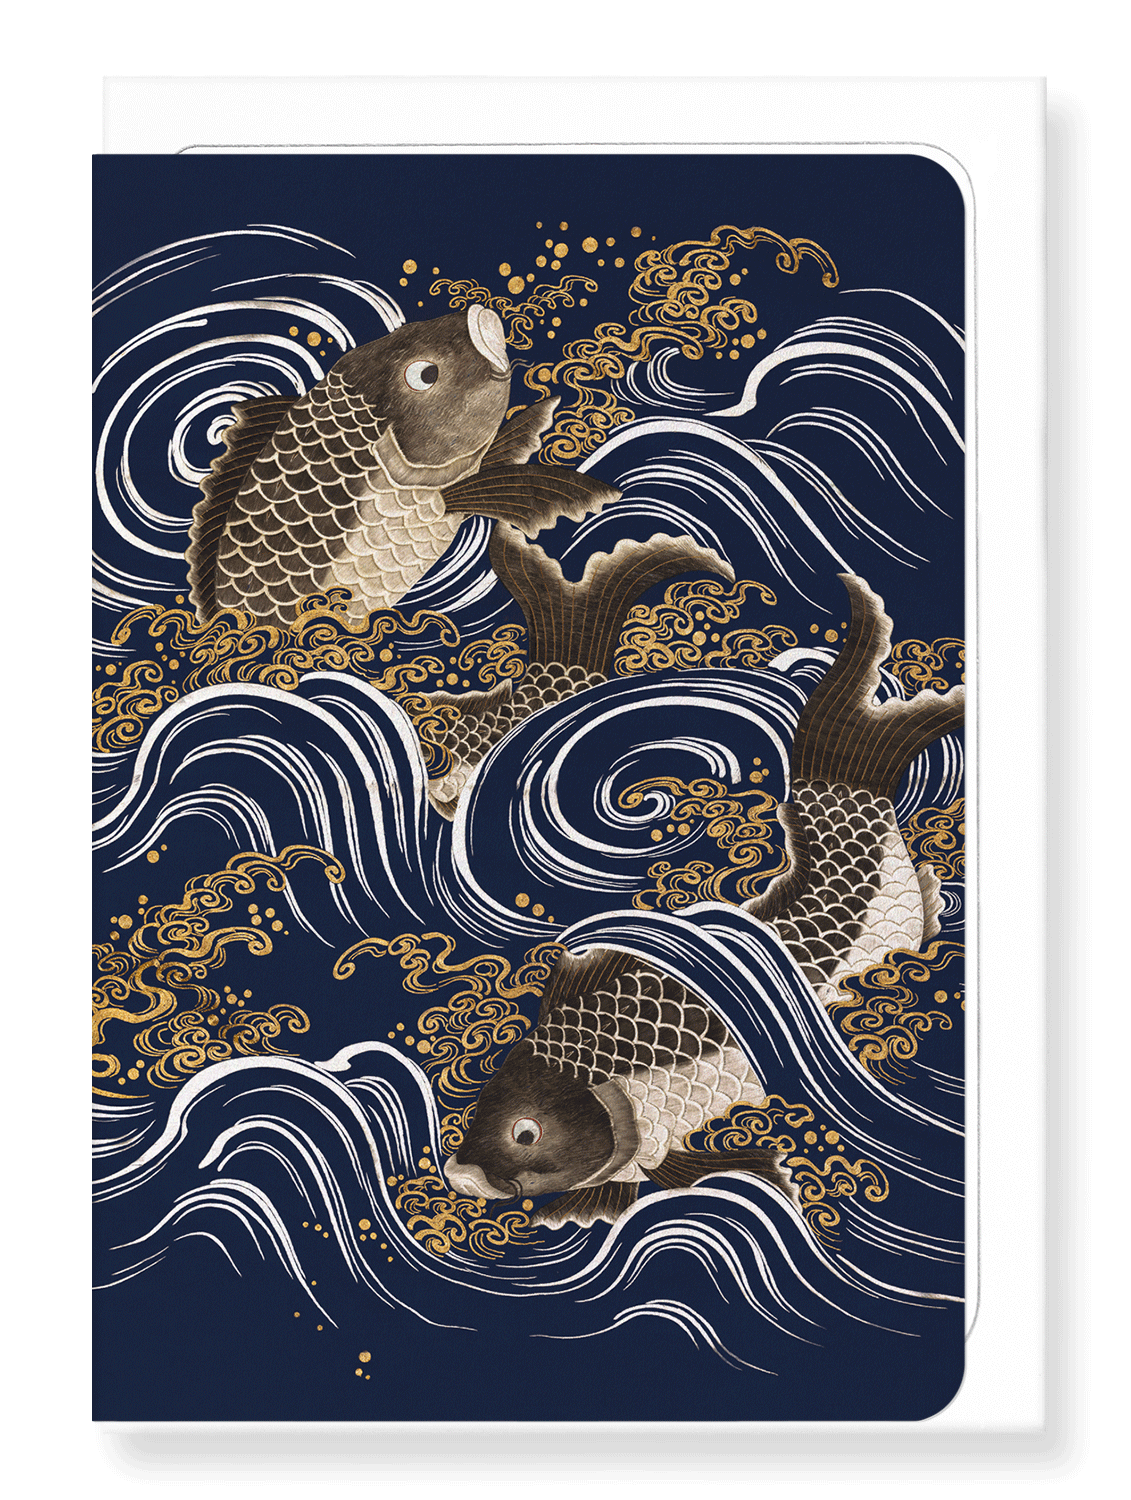 Ezen Designs - Carps in waves - Greeting Card - Front